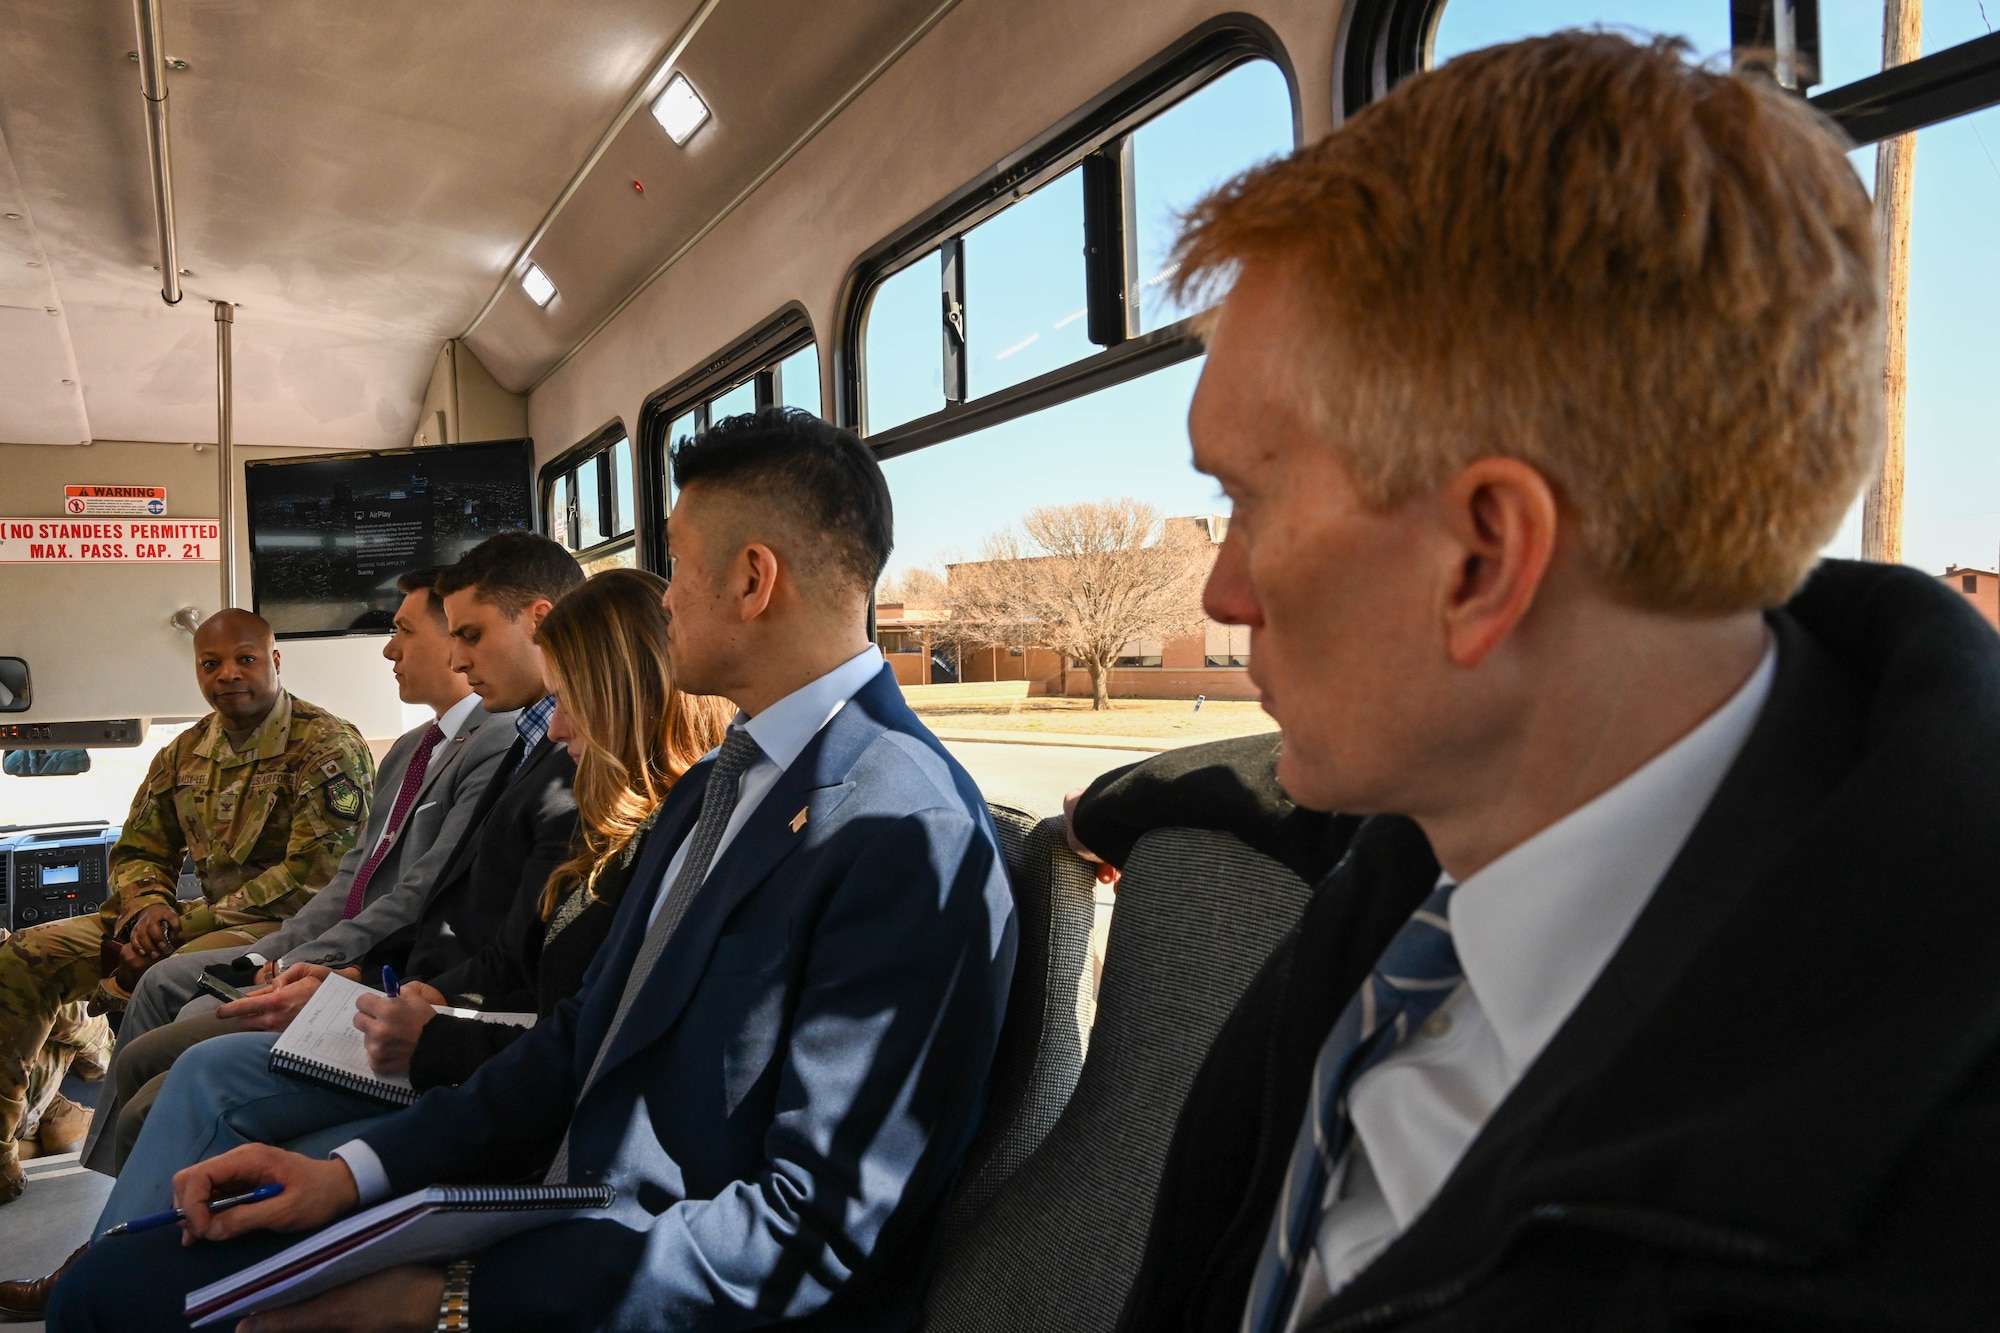 U.S. Air Force Col. Patrick Brady-Lee (left), 97th Air Mobility Wing (AMW) vice commander, briefs U.S. Sen. James Lankford of Oklahoma (right), about the wing’s mission while touring Altus Air Force Base, Oklahoma, Feb. 23, 2023. Airmen and key spouses from the 97th AMW showcased the wing’s mission along with projects that will enhance quality of life for Airmen and families at Altus AFB. (U.S. Air Force photo by Senior Airman Trenton Jancze)